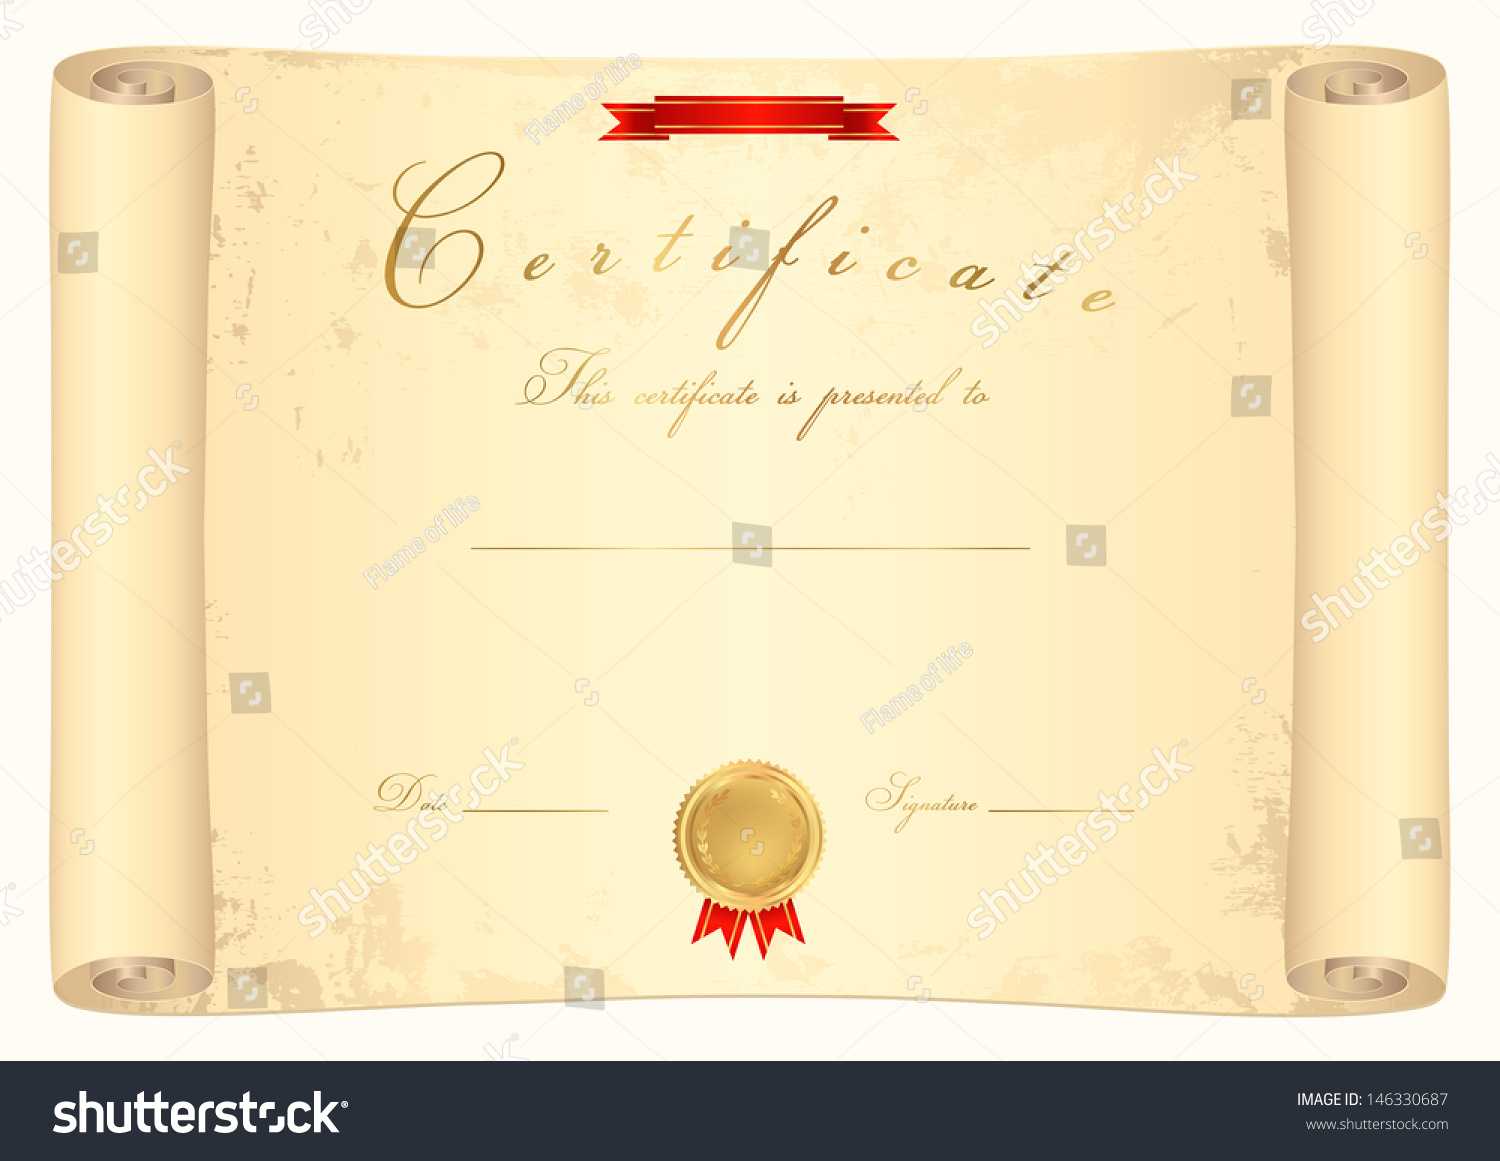 Scroll Certificate Completion Template Sample Background Regarding Certificate Scroll Template